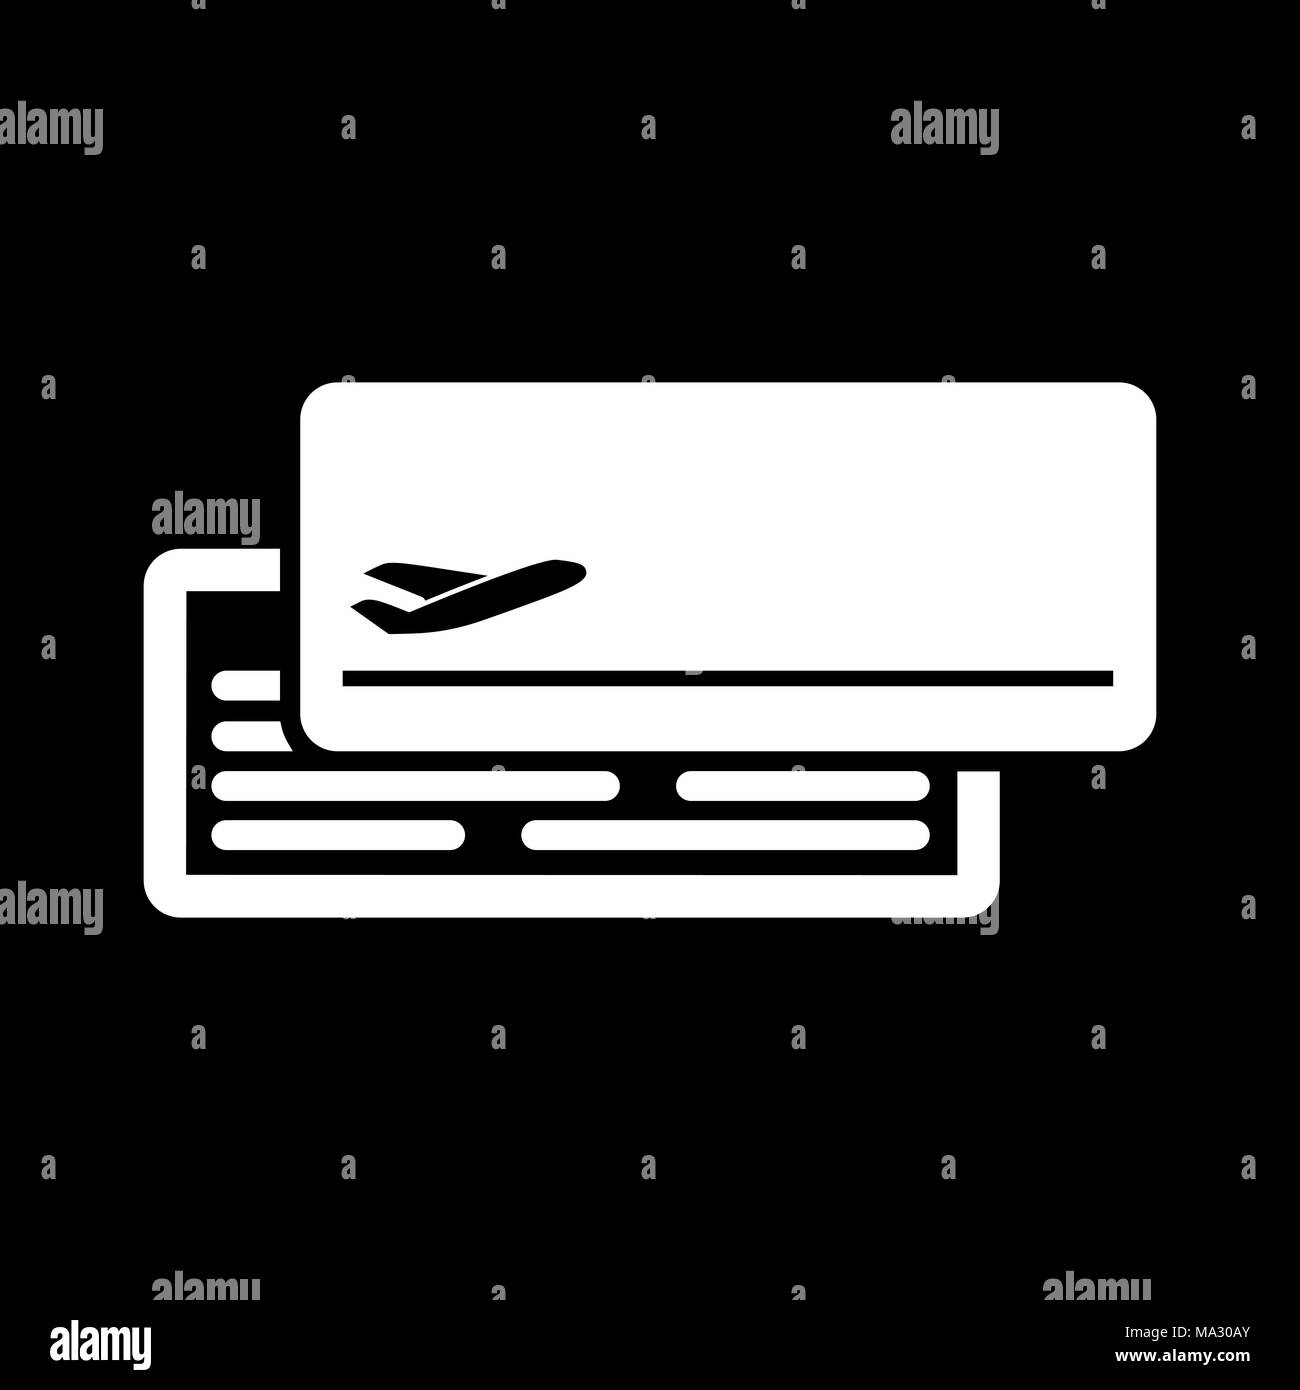 Plane ticket icon flat style simple illustration. Boarding pass. Stock Vector